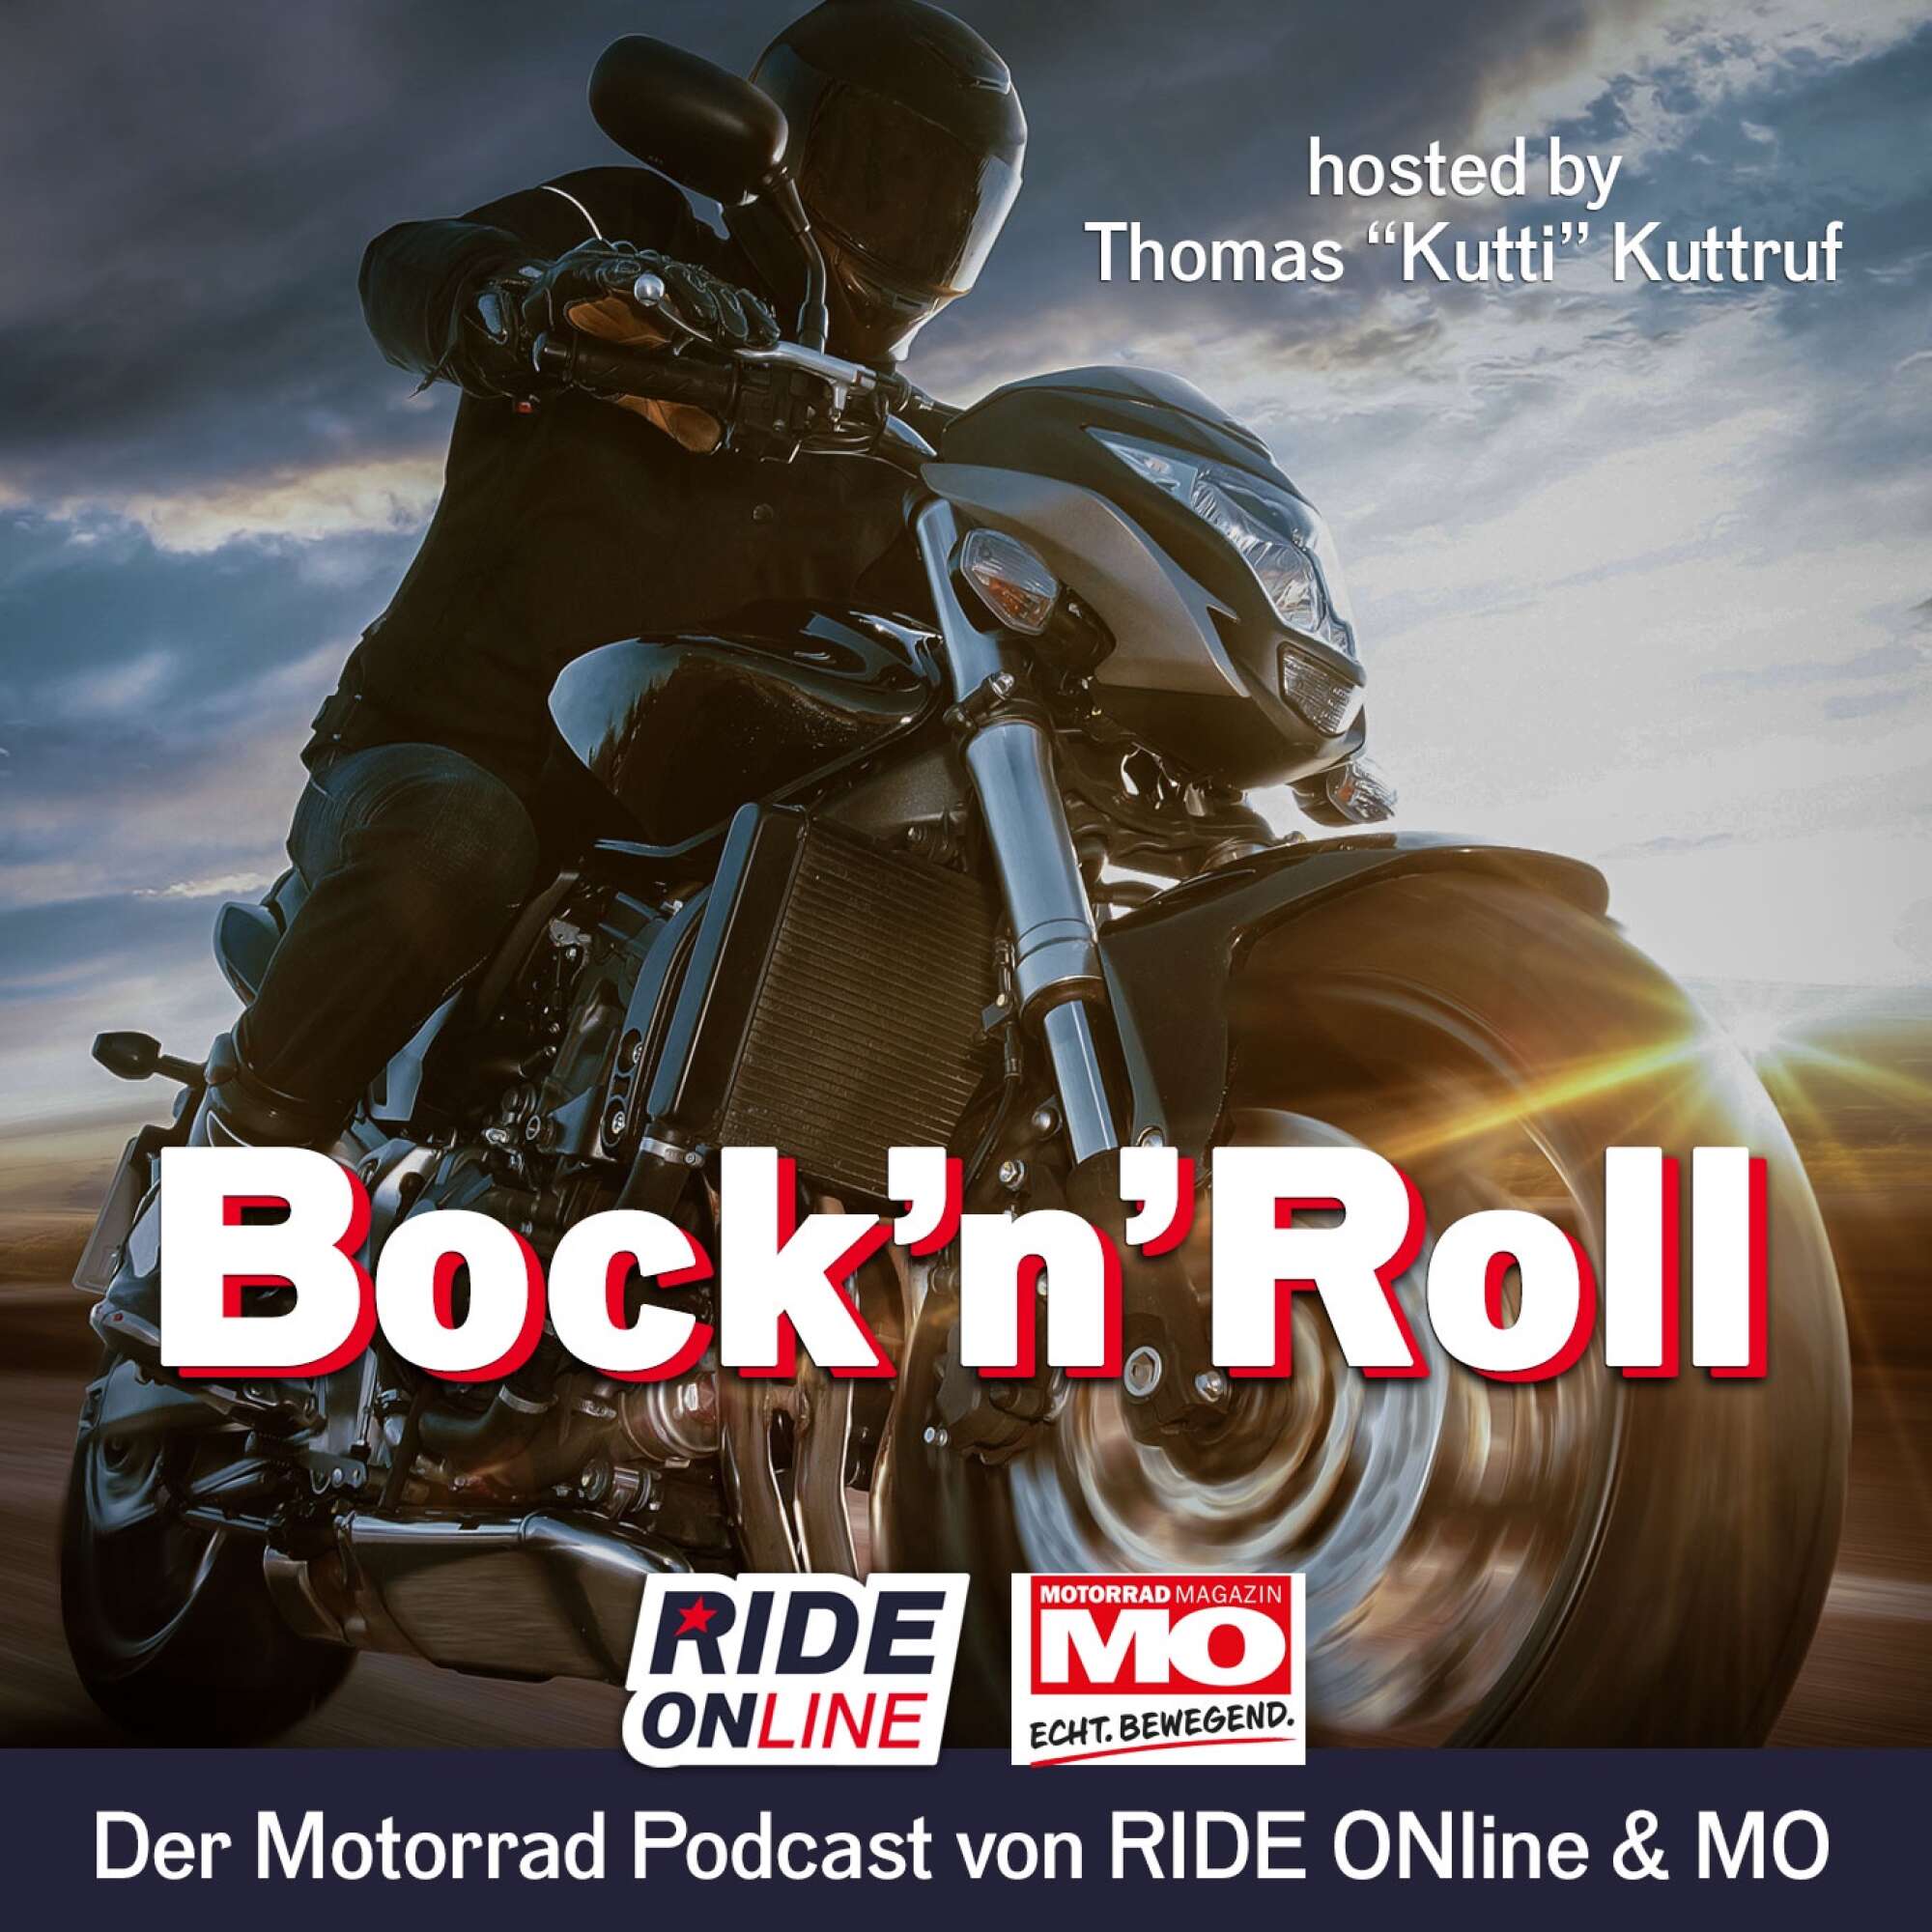 Podcast-Cover "Bock'n'Roll"